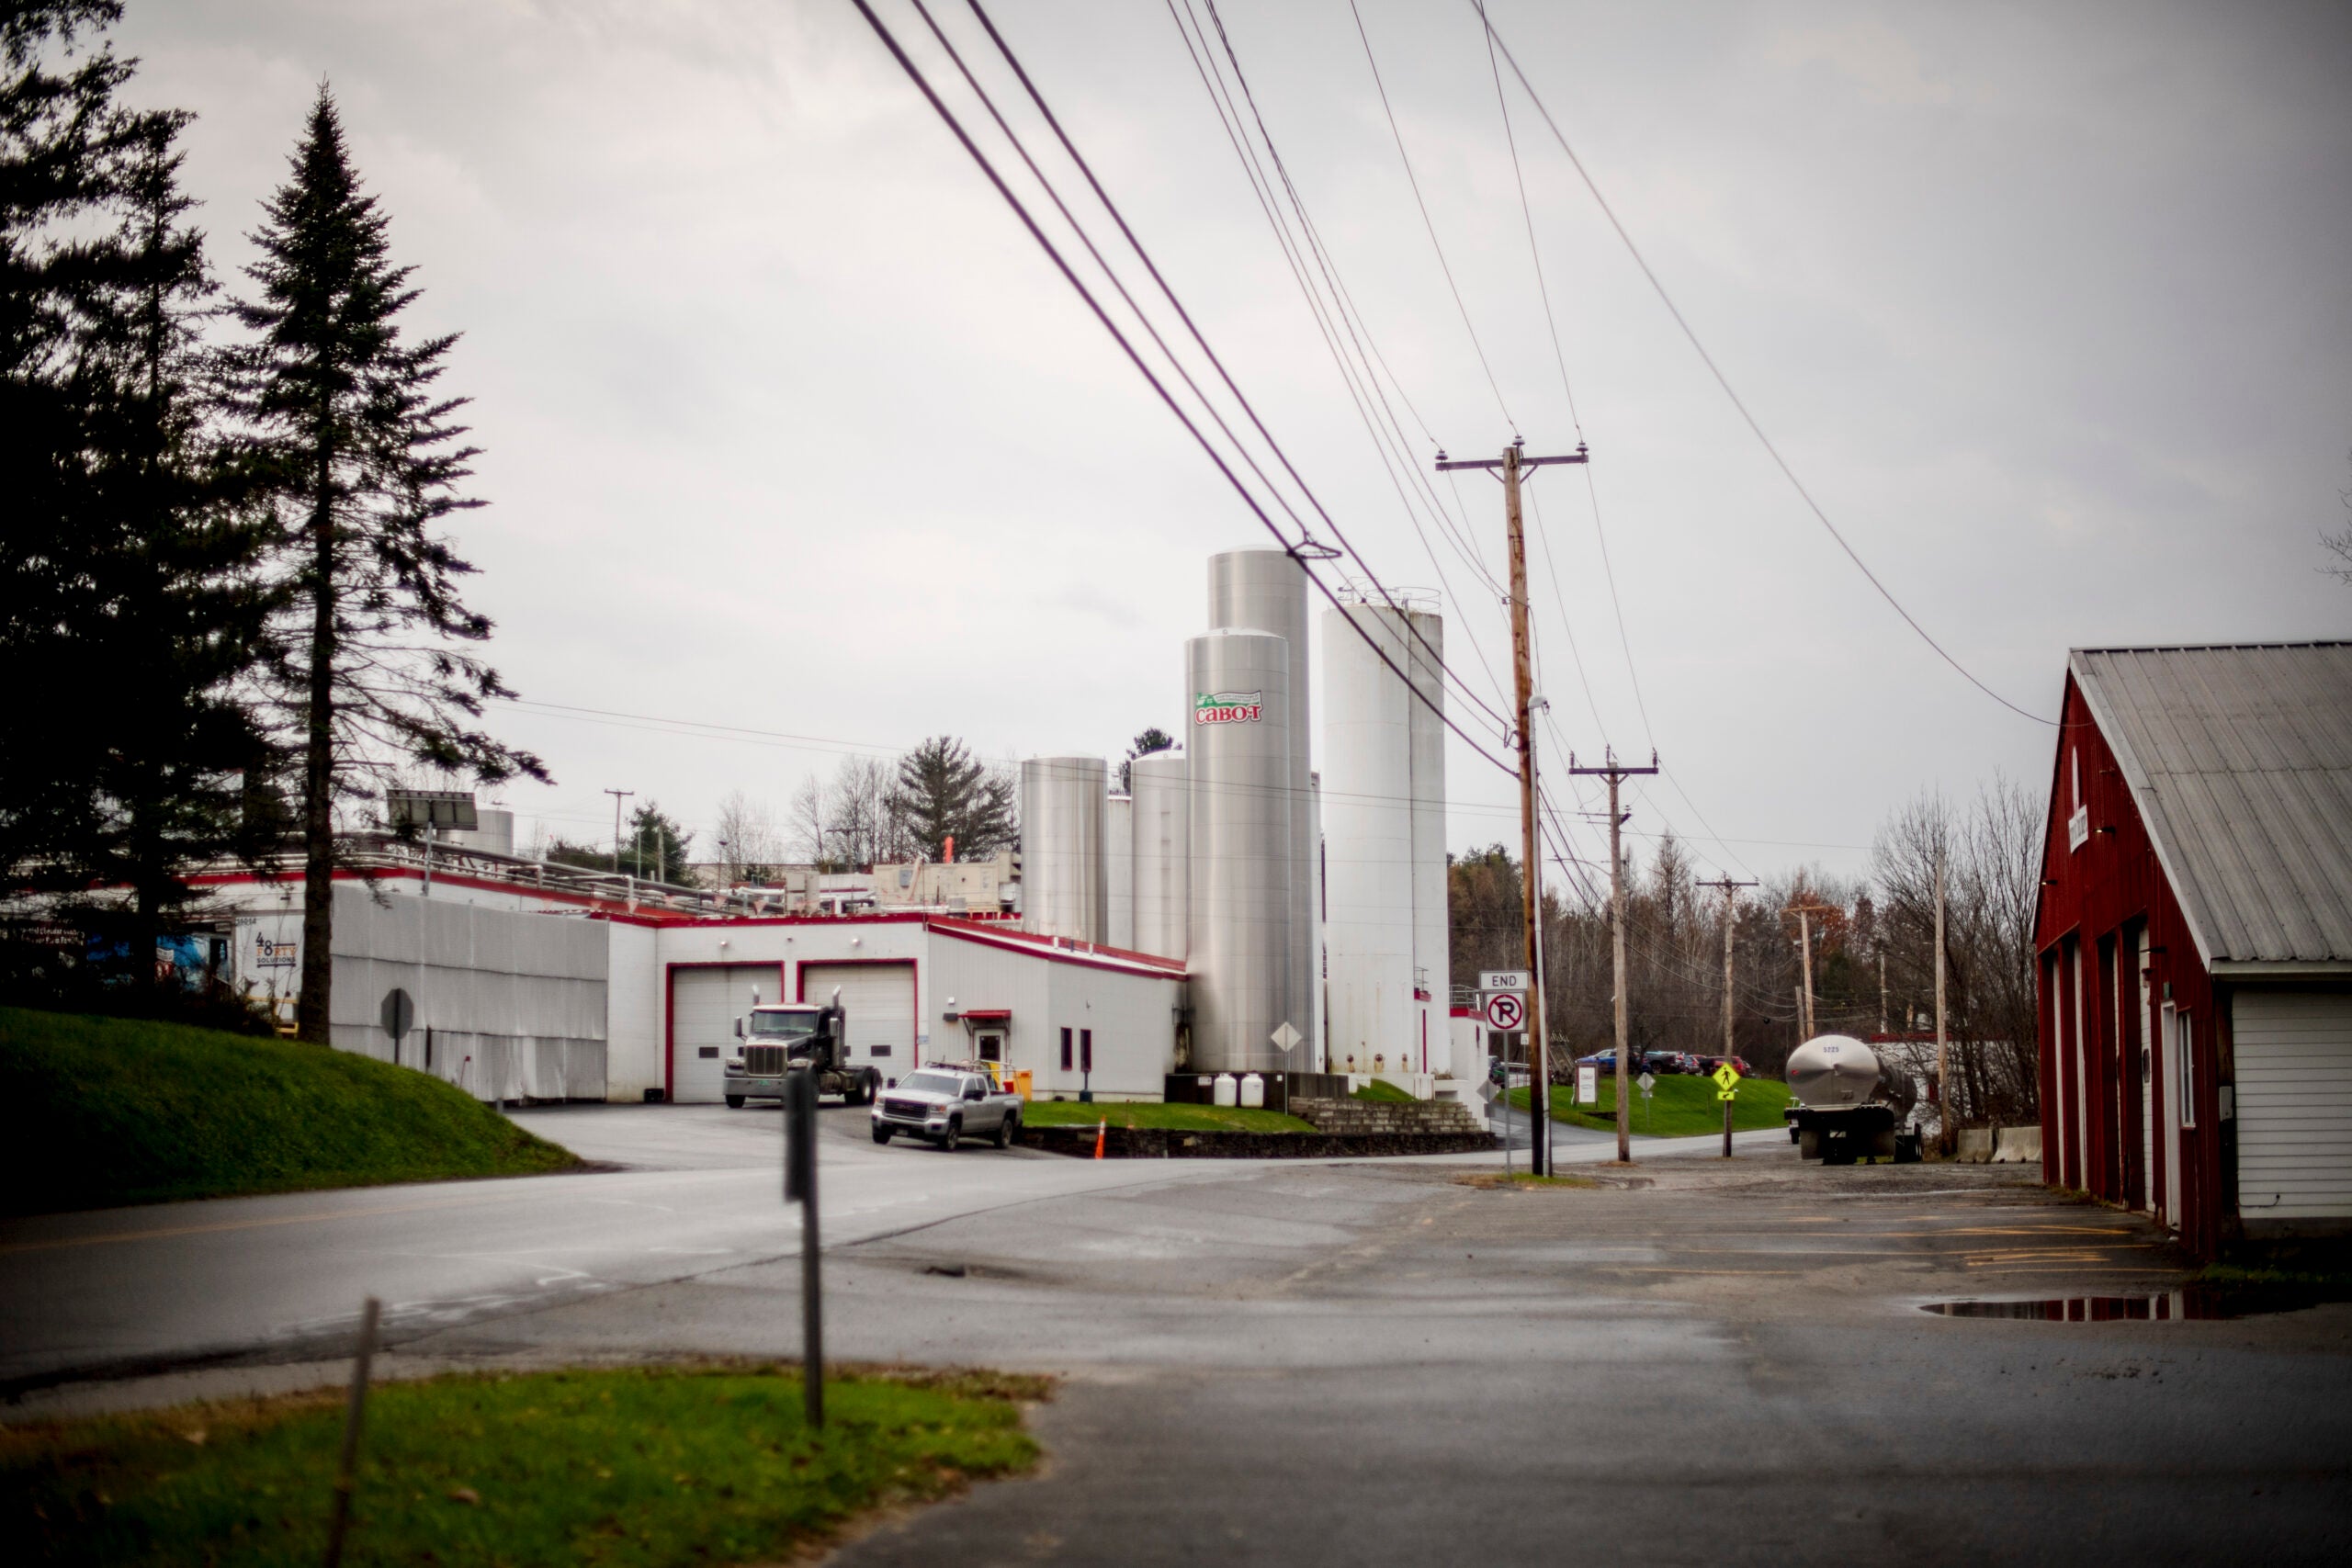 The Cabot Creamery facility in Cabot, Vt.